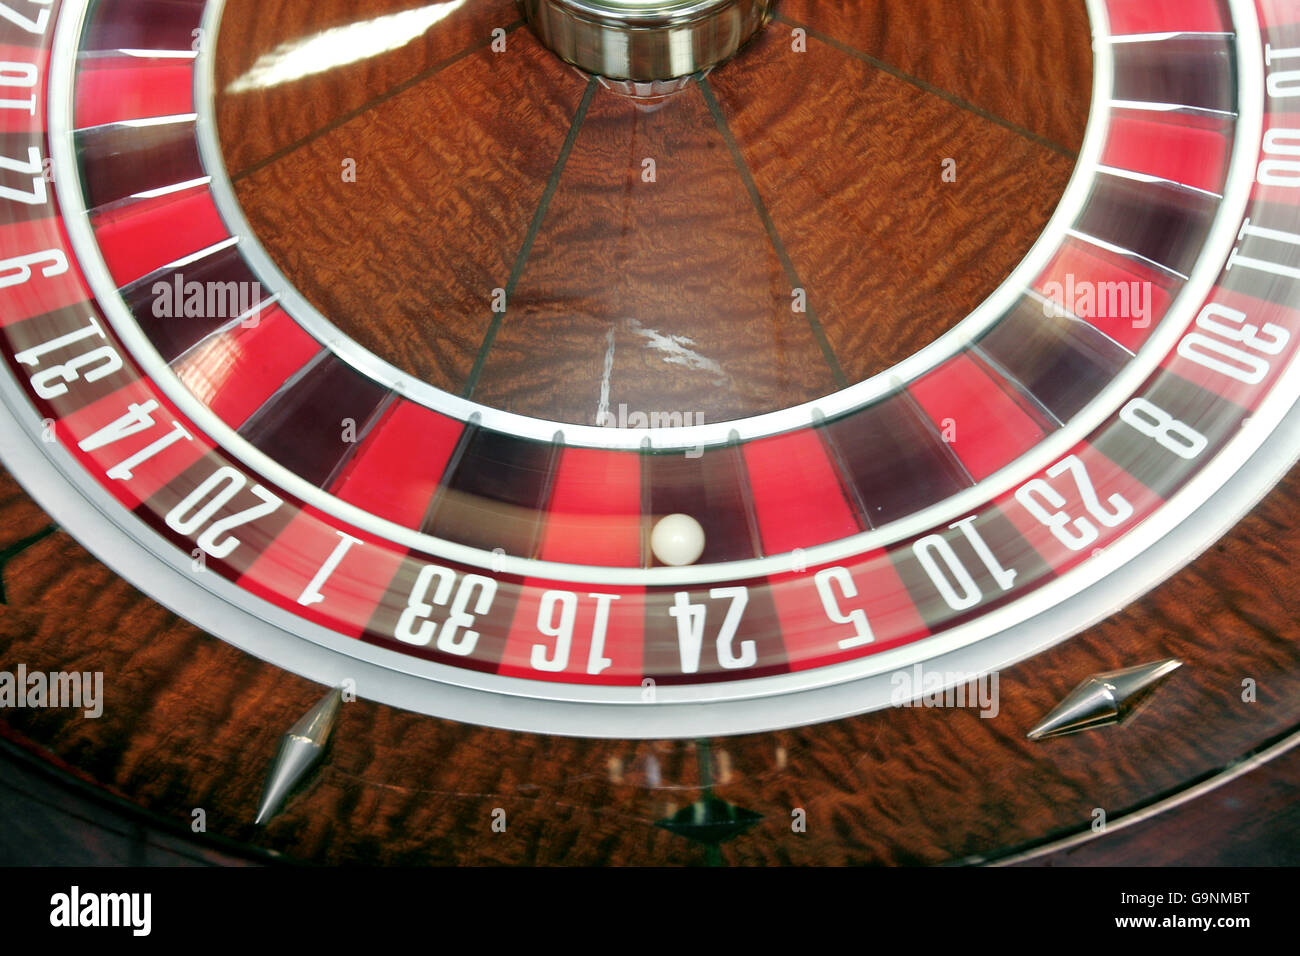 A spinning roulette wheel at the regional gaming academy at Blackpool and Fylde college, based in the Lancashire seaside town of Blackpool - one of the frontrunners among the seven areas shortlisted to host Britain's first supercasino. Stock Photo